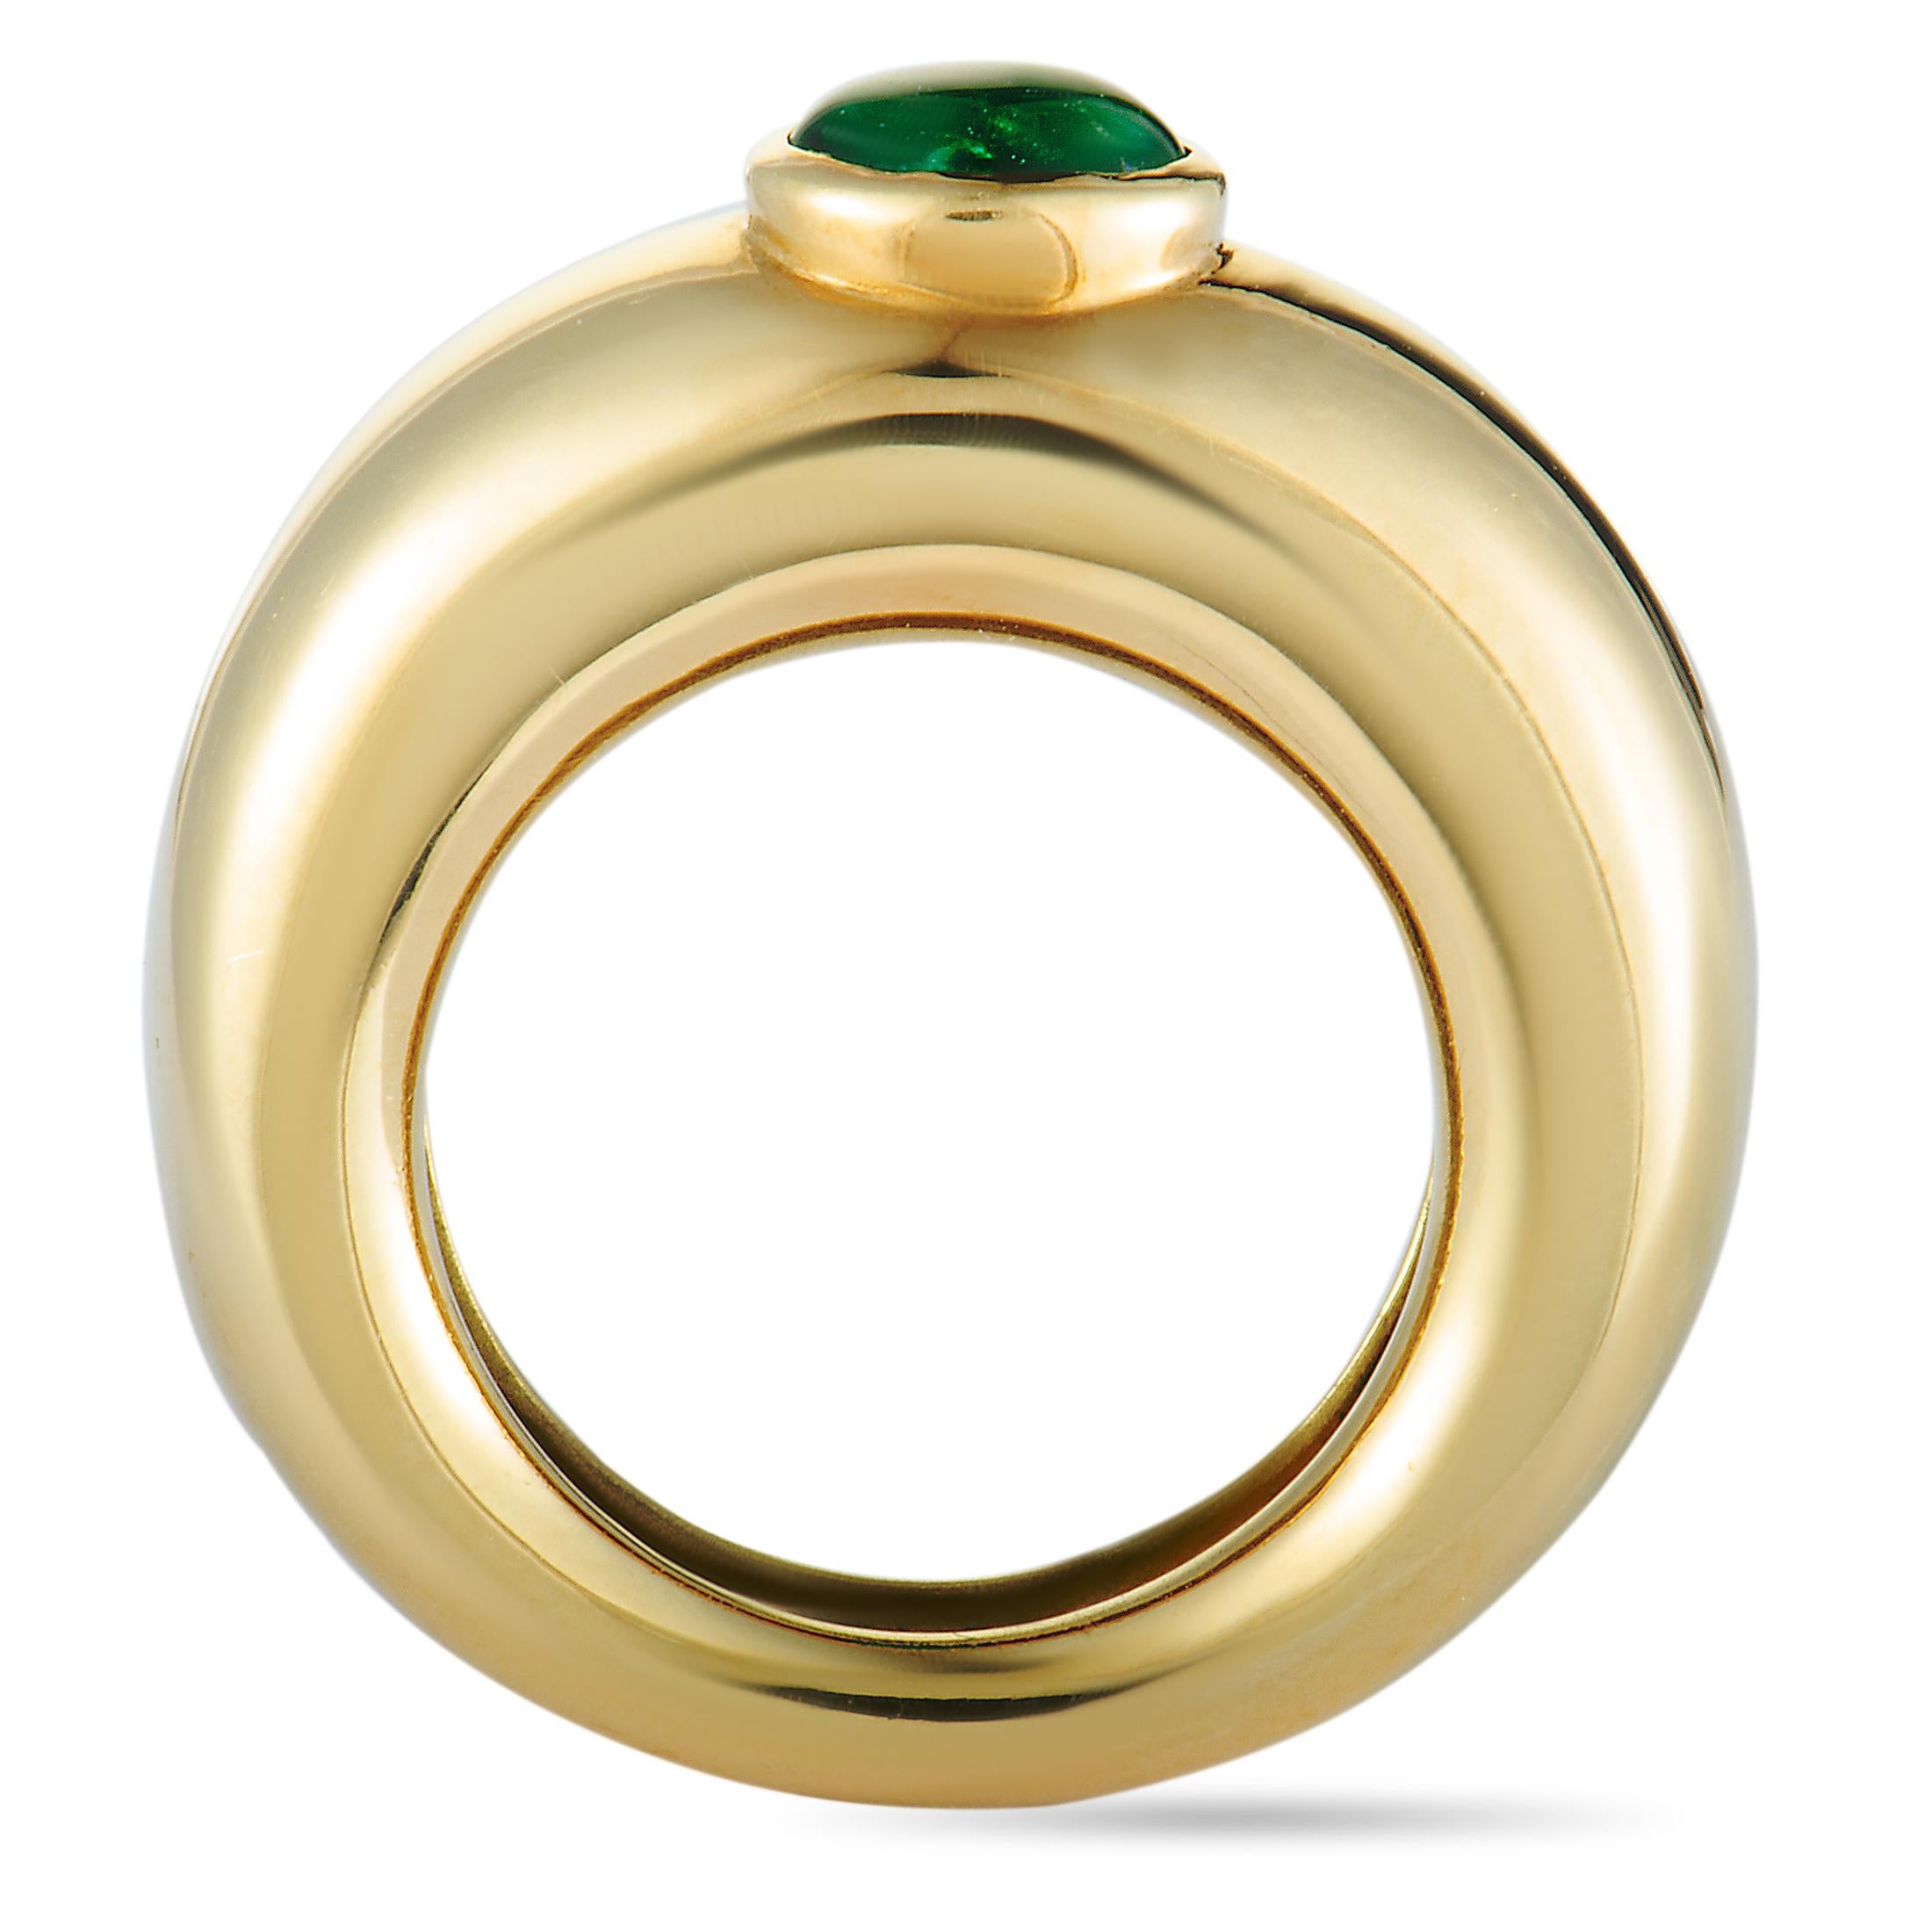 The ever-regal appeal of emerald is brought to a whole new level by the luxurious radiance of gold in this fascinating piece designed by Chaumet. The ring is masterfully crafted from 18K yellow gold and it weighs 11.7 grams.
Ring Top Dimensions: 7mm